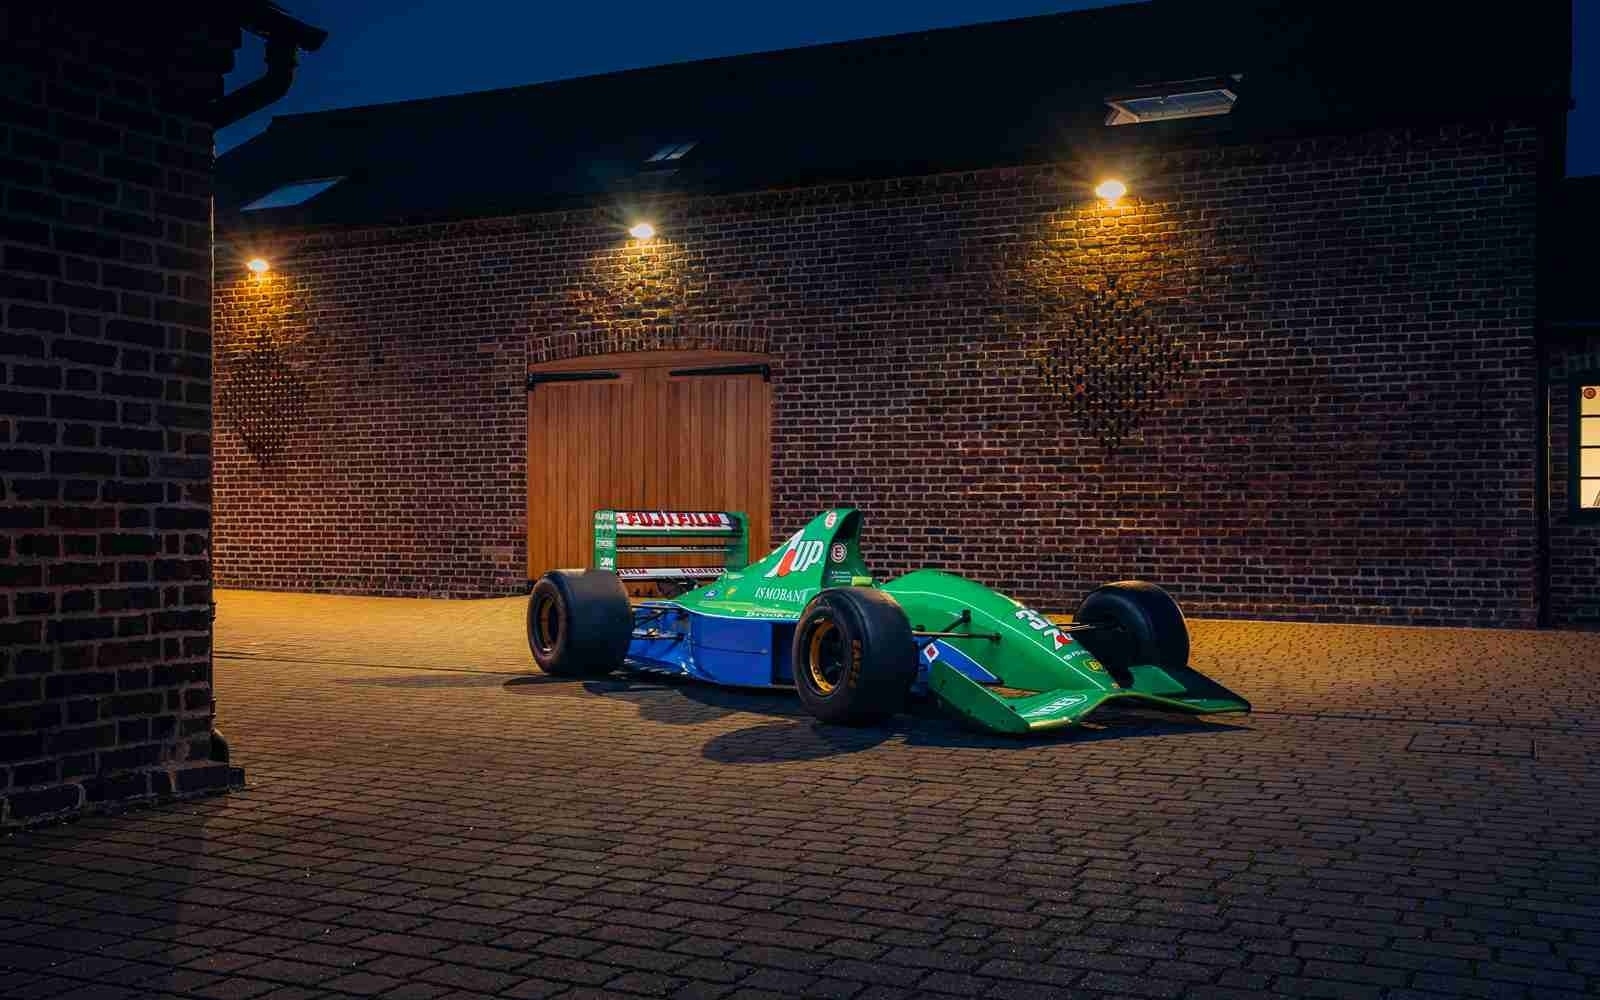 Michael Schumacher's First F1 Car is for Sale…Again